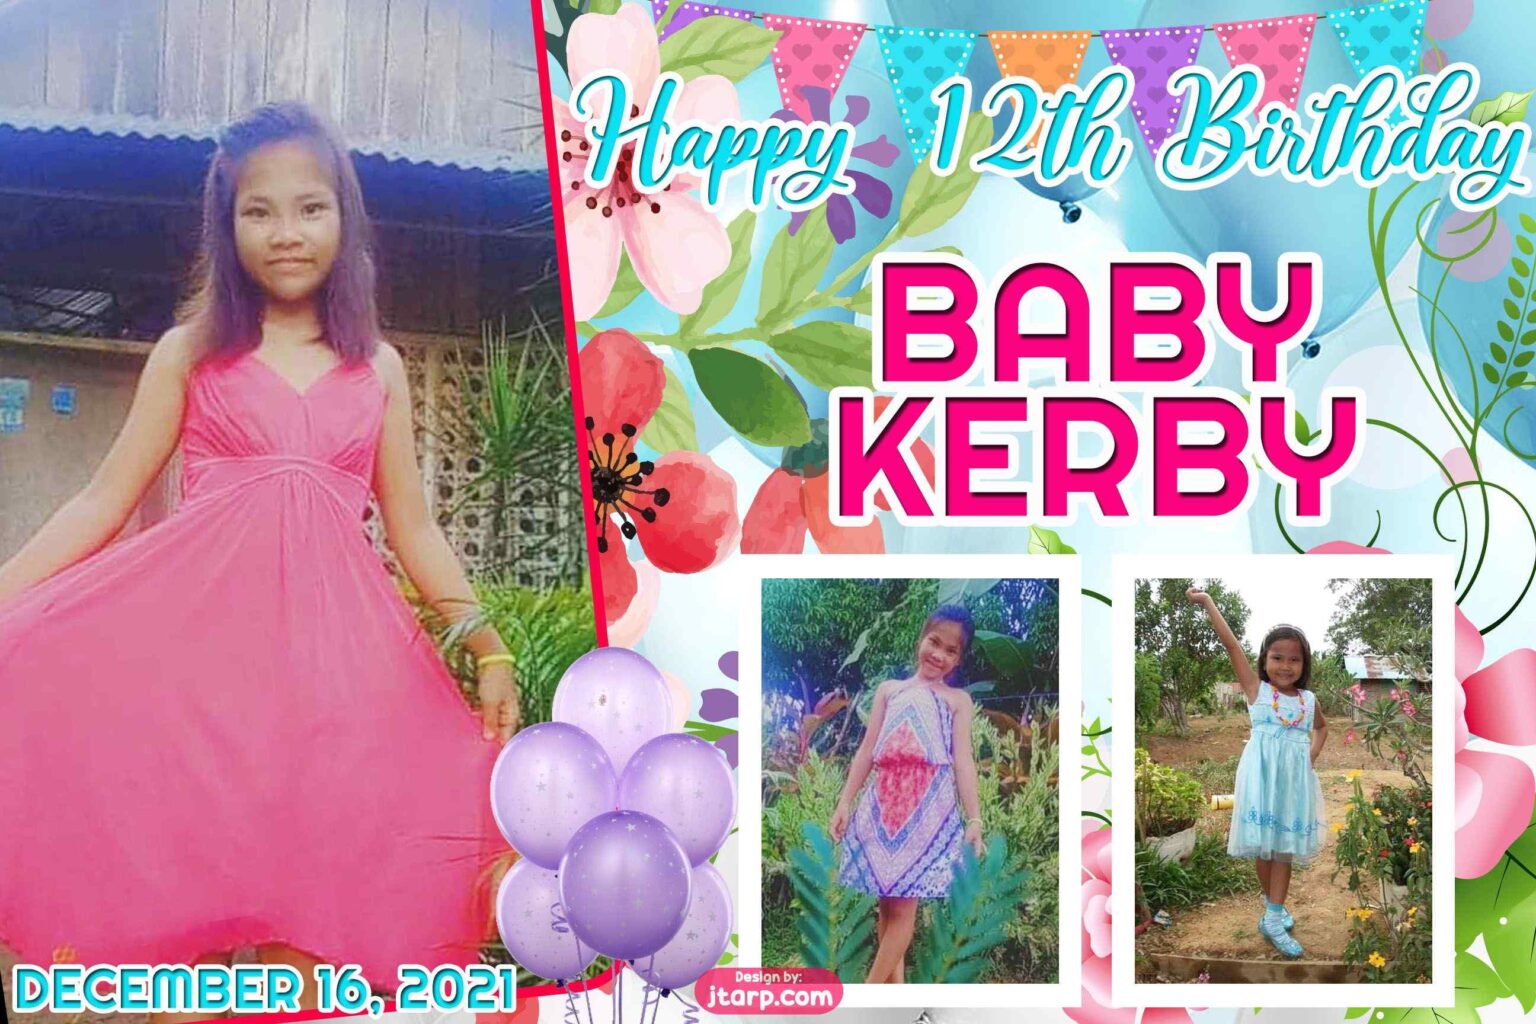 2x3 Happy 12th birthday Baby Kerby Blloon and Floral Design